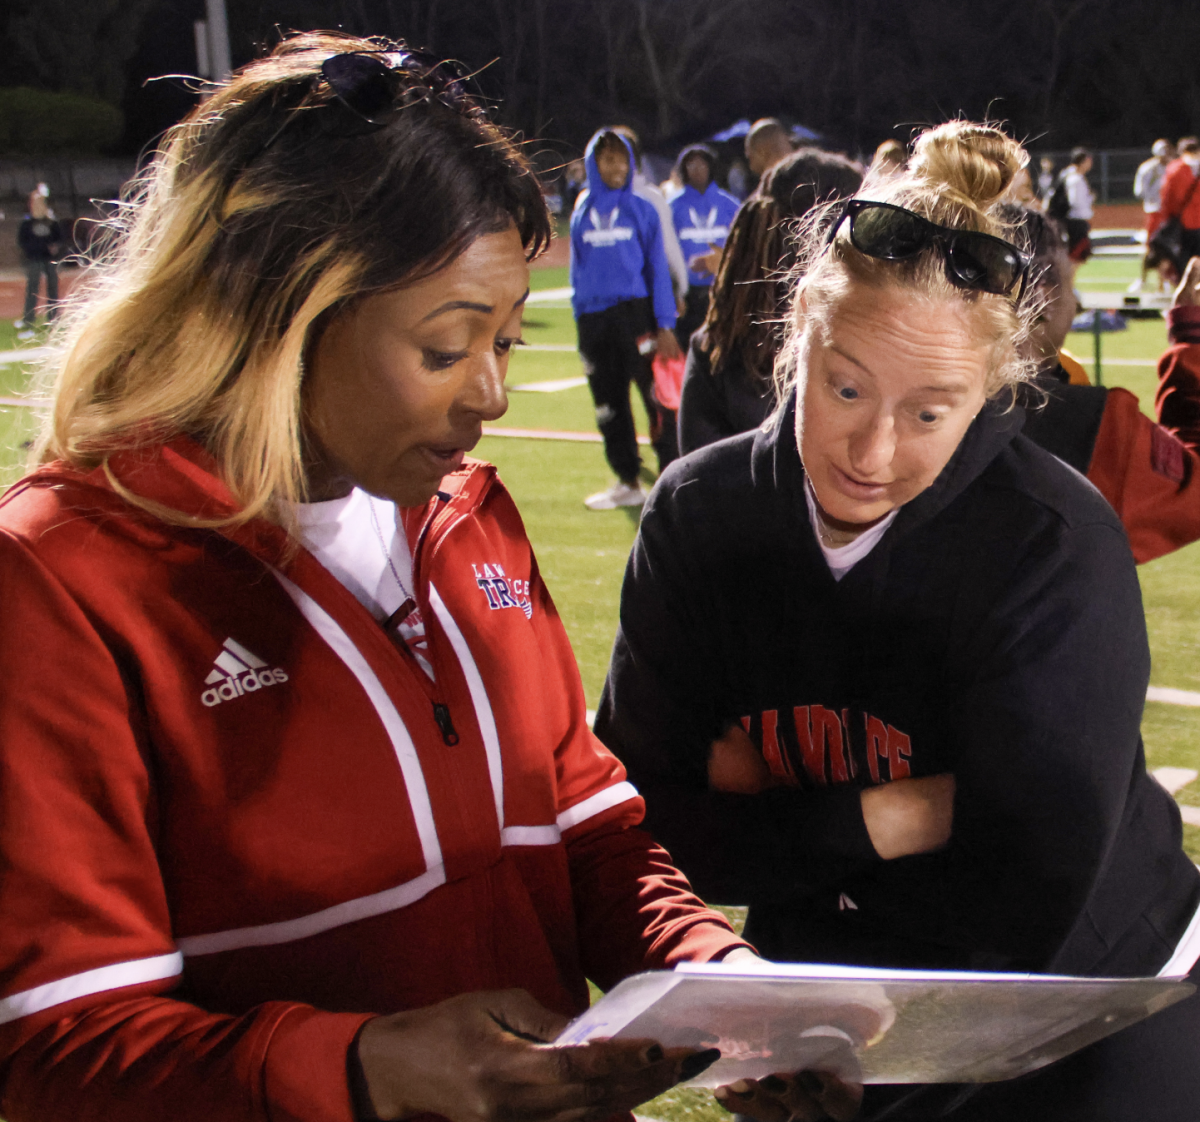 Comparing times, head track coach Audrey Trowbridge excitedly talks with coaches Laura Brensing and Kyle Morgison after the 4x4 relay on April 12.  